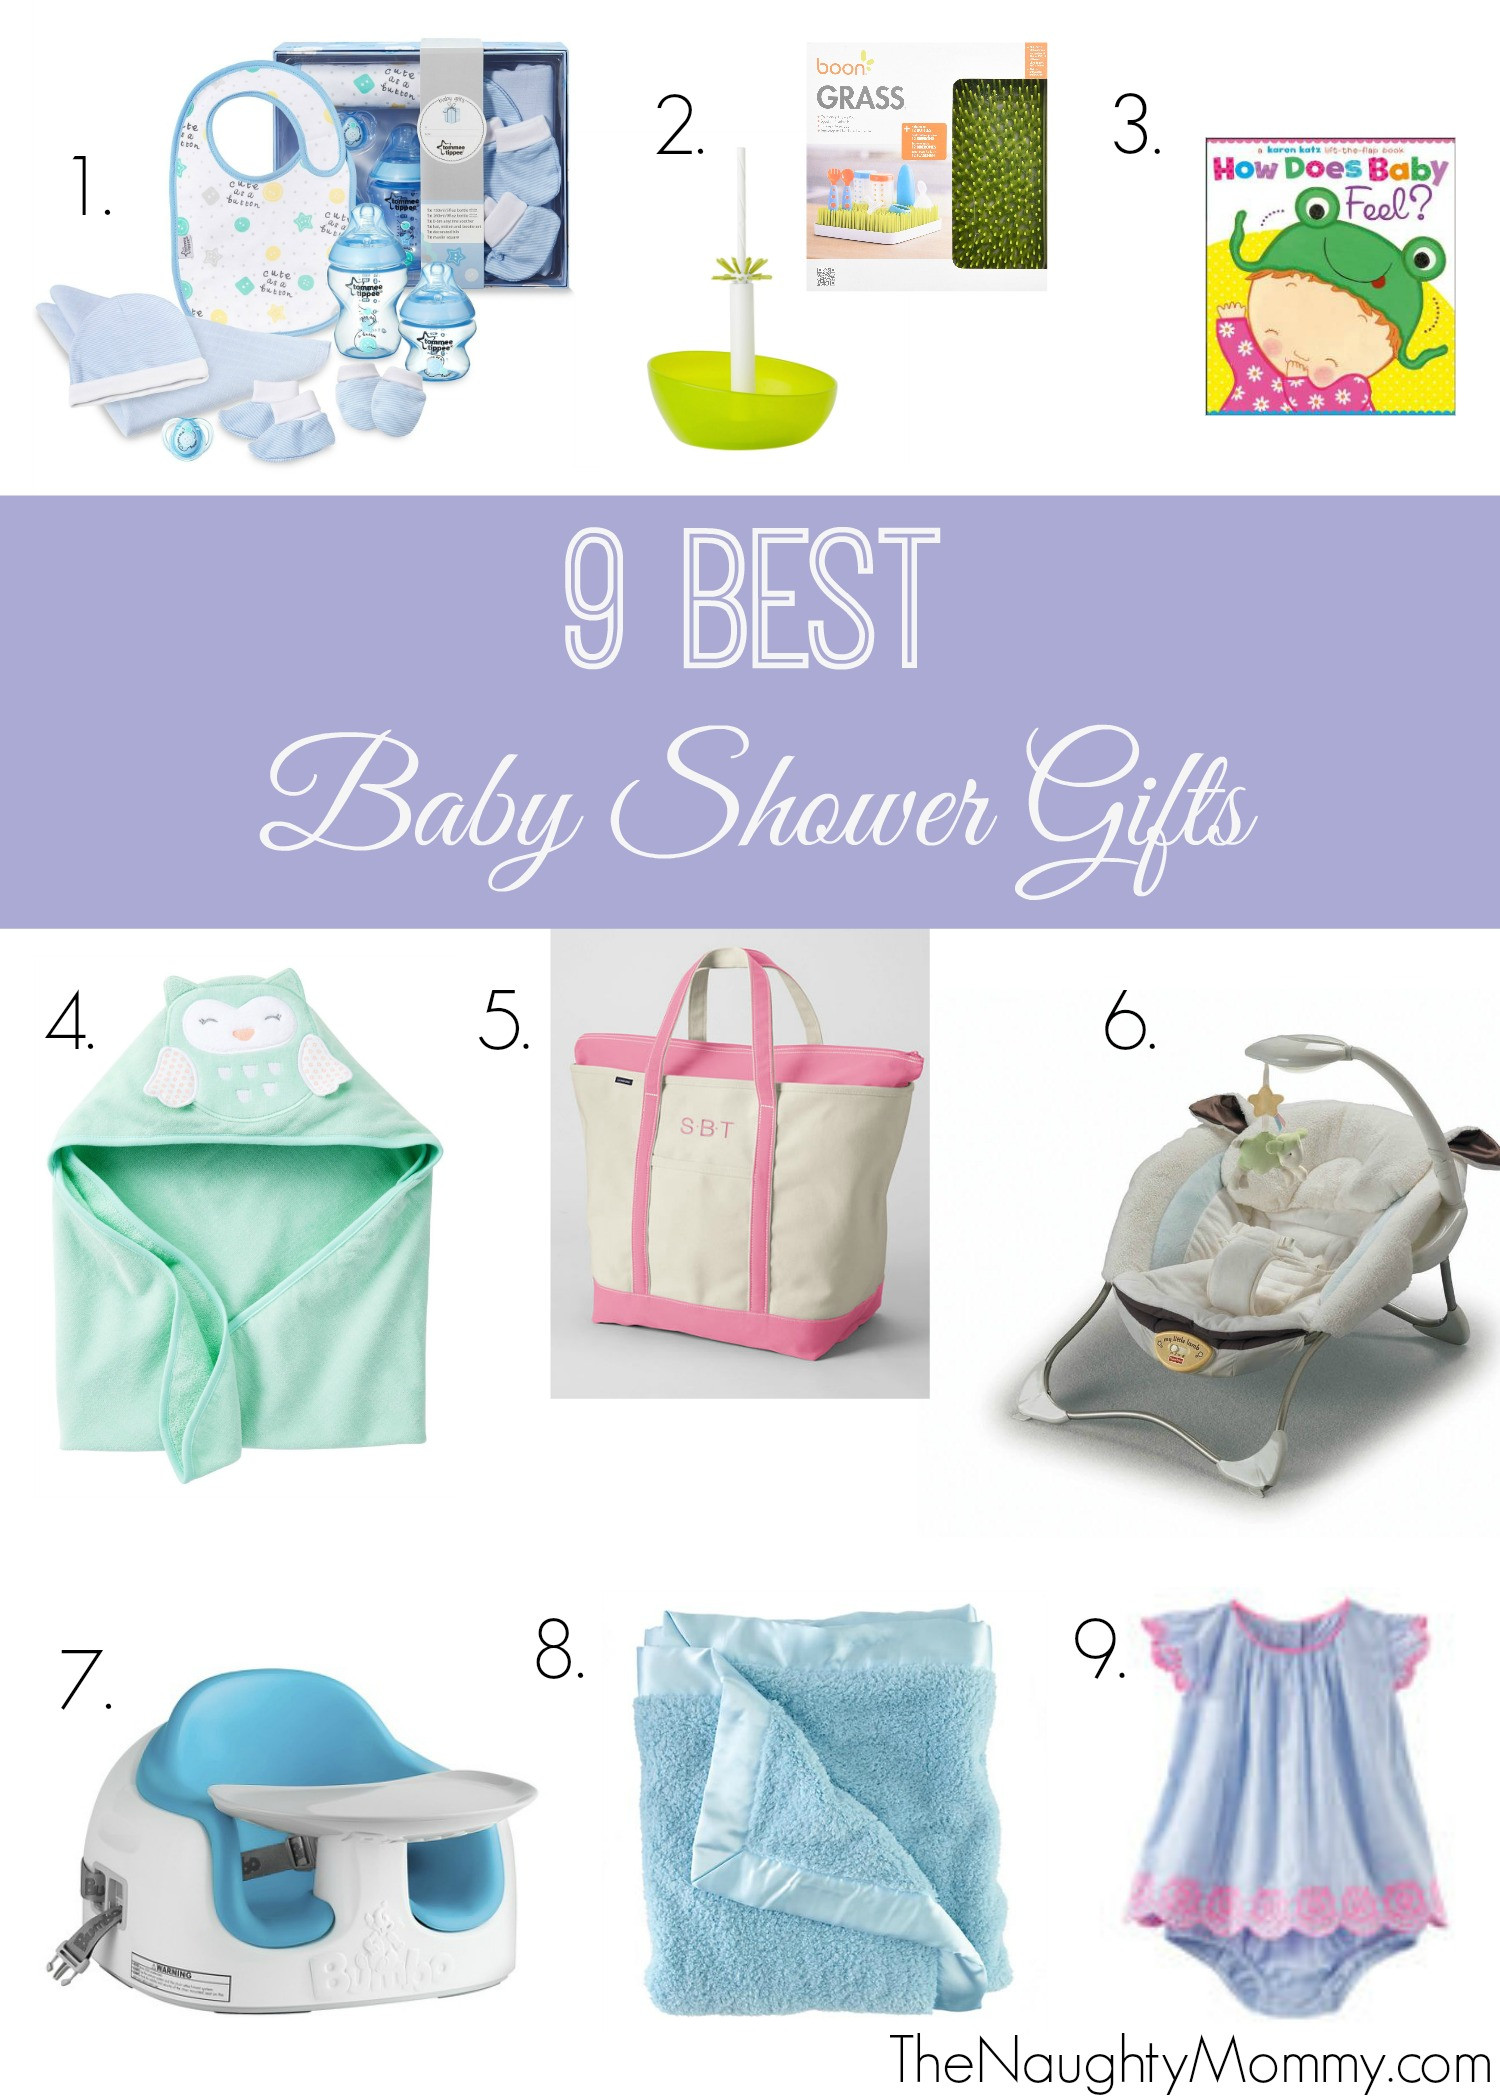 Coolest Baby Gifts 2015
 9 Best Baby Shower Gifts The Naughty Mommy